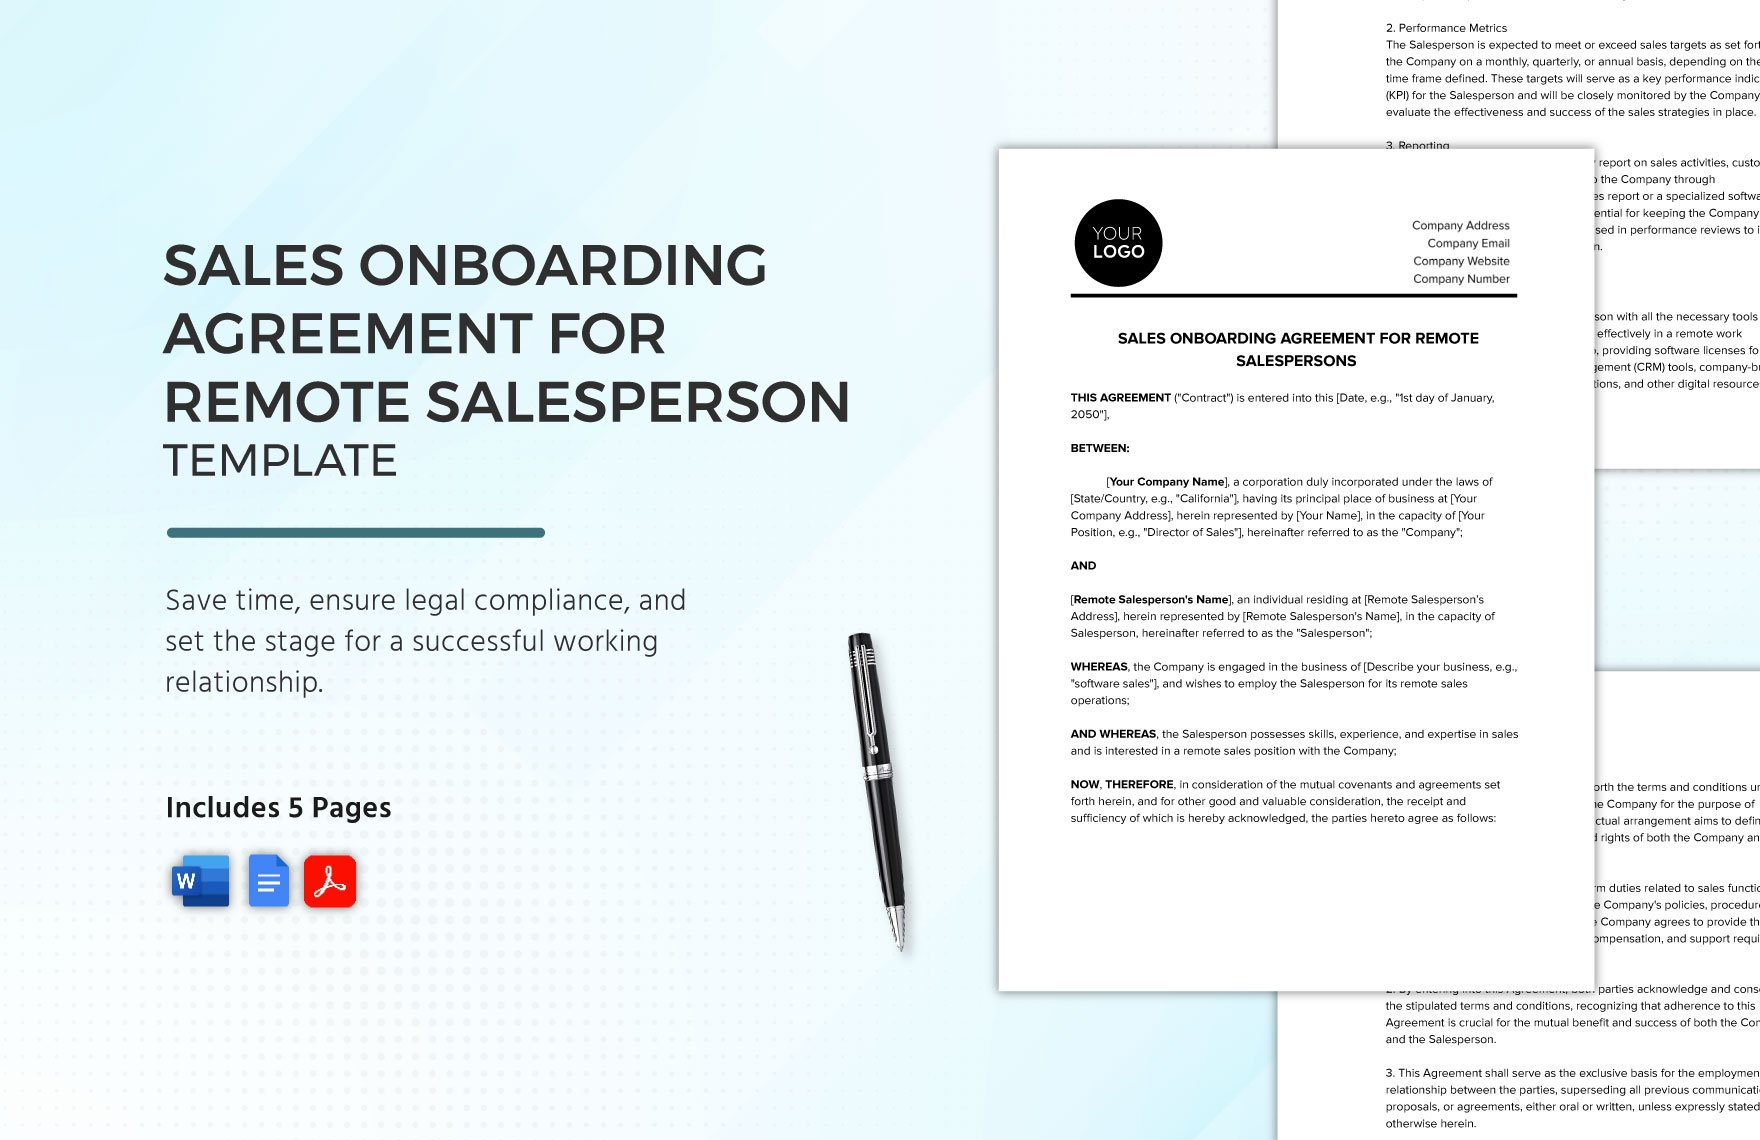 Sales Onboarding Agreement for Remote Salespersons Template in Word, Google Docs, PDF